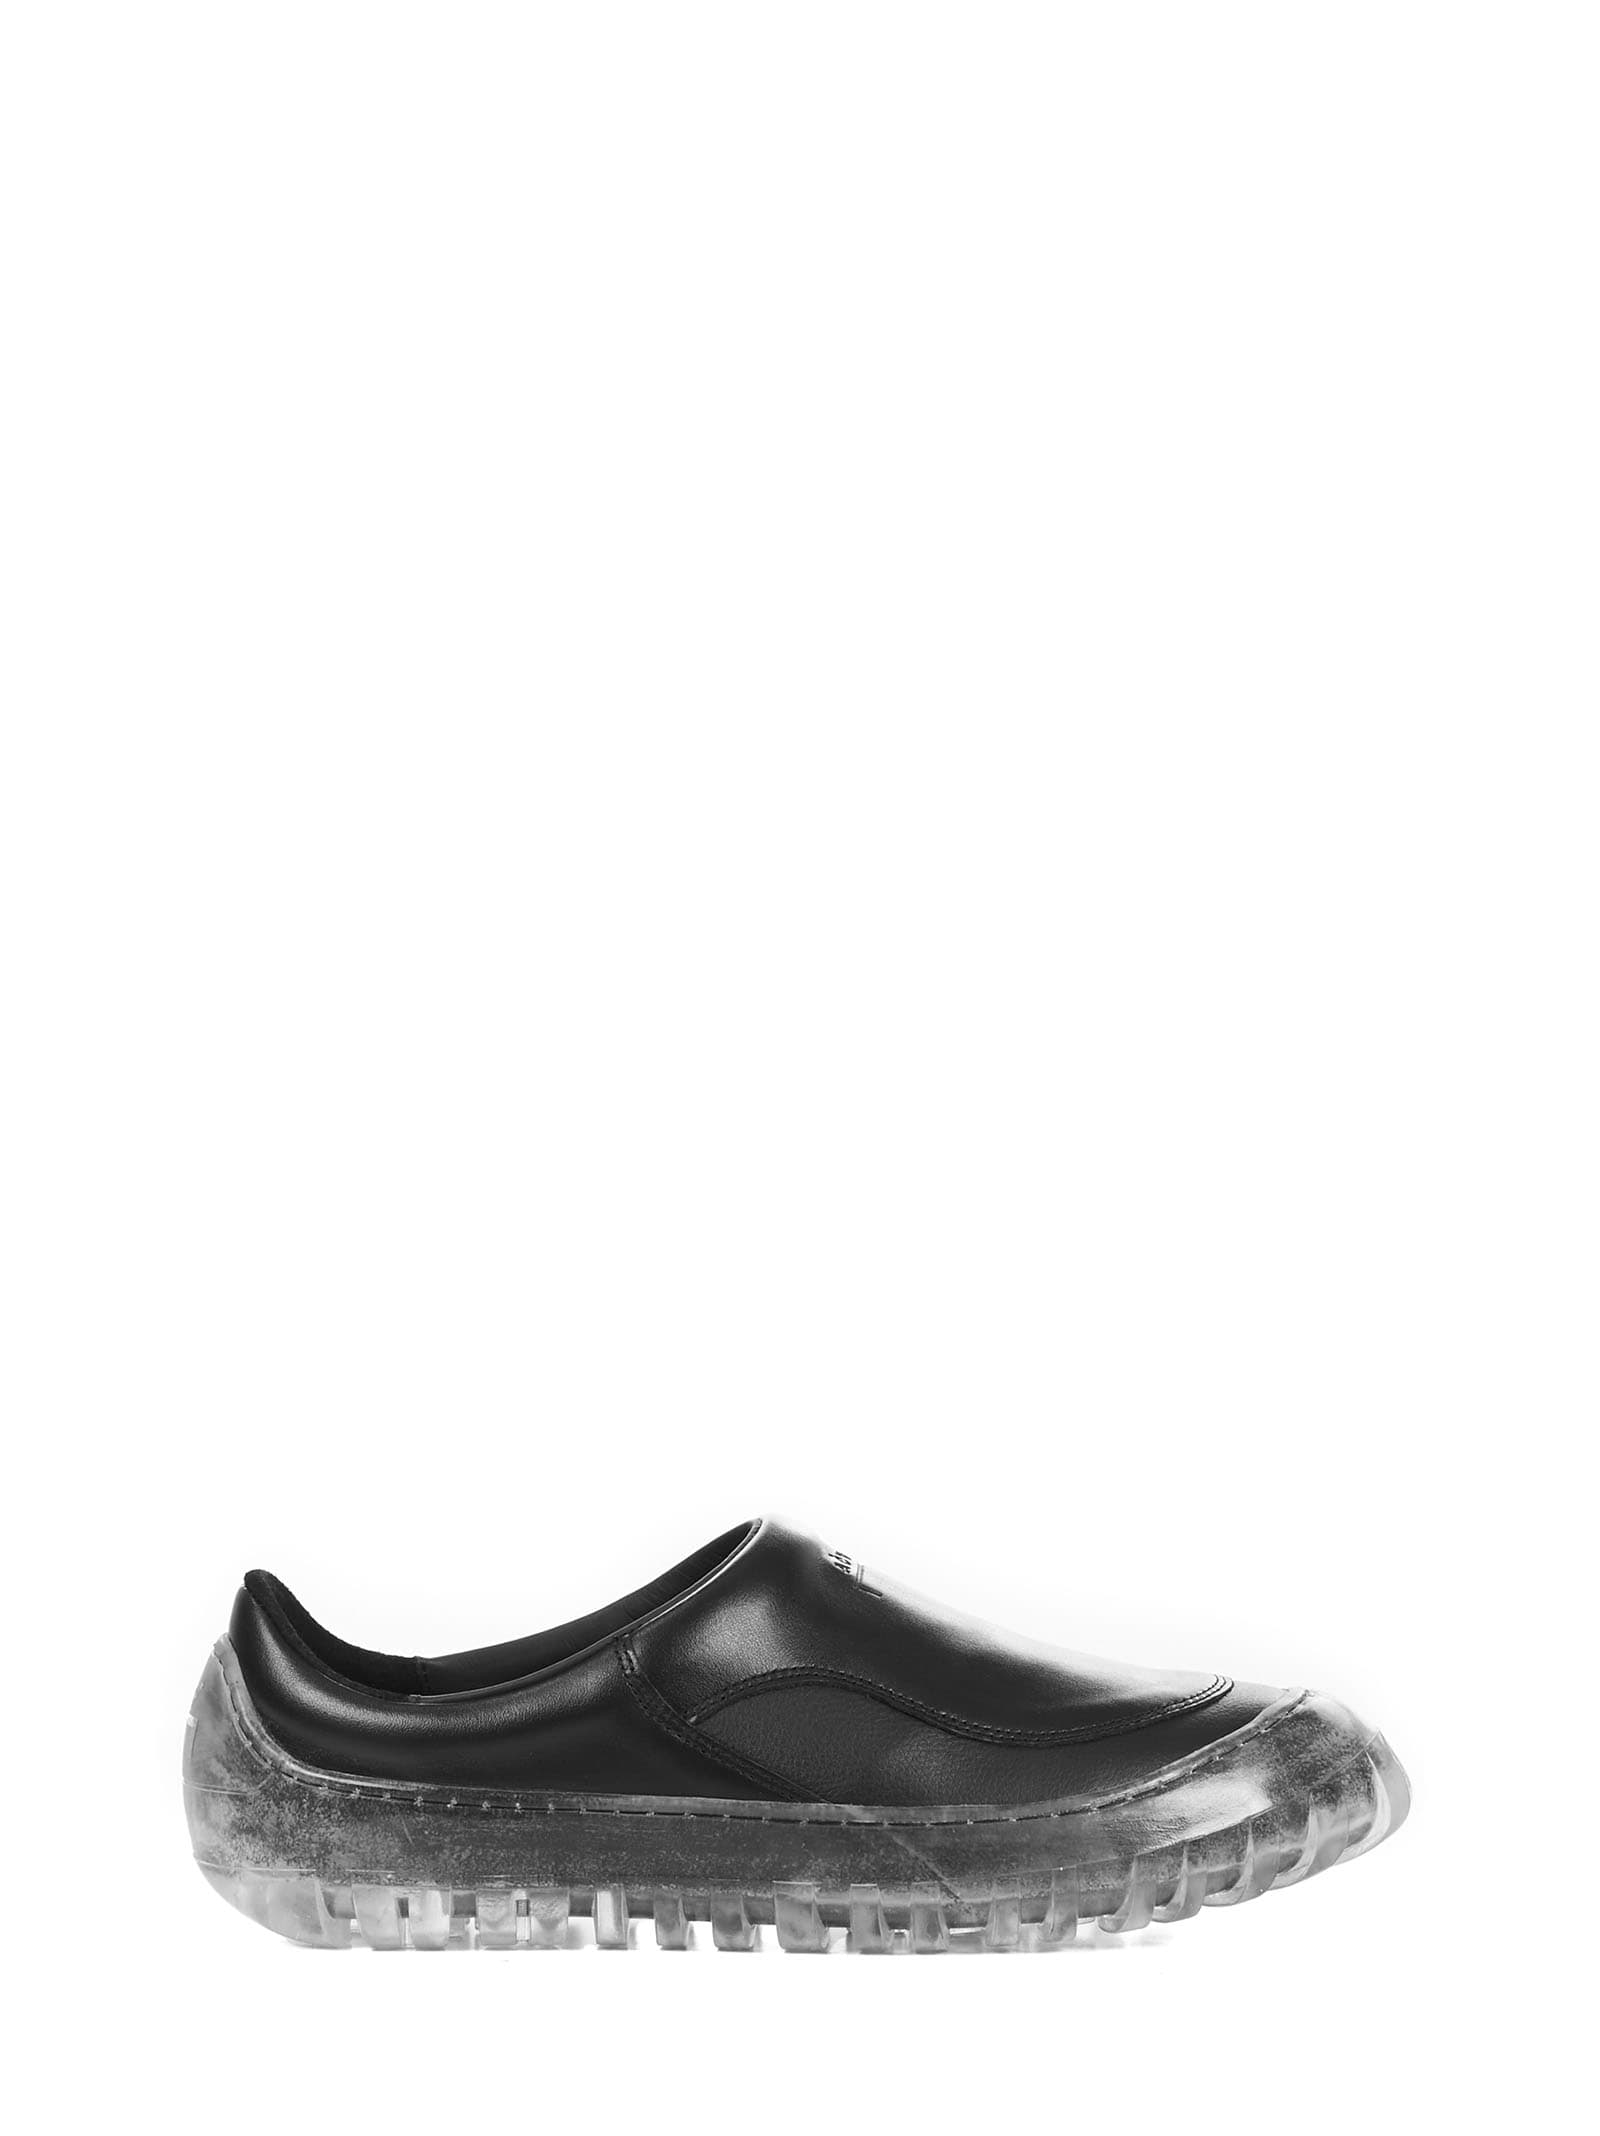 A-COLD-WALL* A COLD WALL STRAND 180 LOAFERS,ACWUF015 BLACK